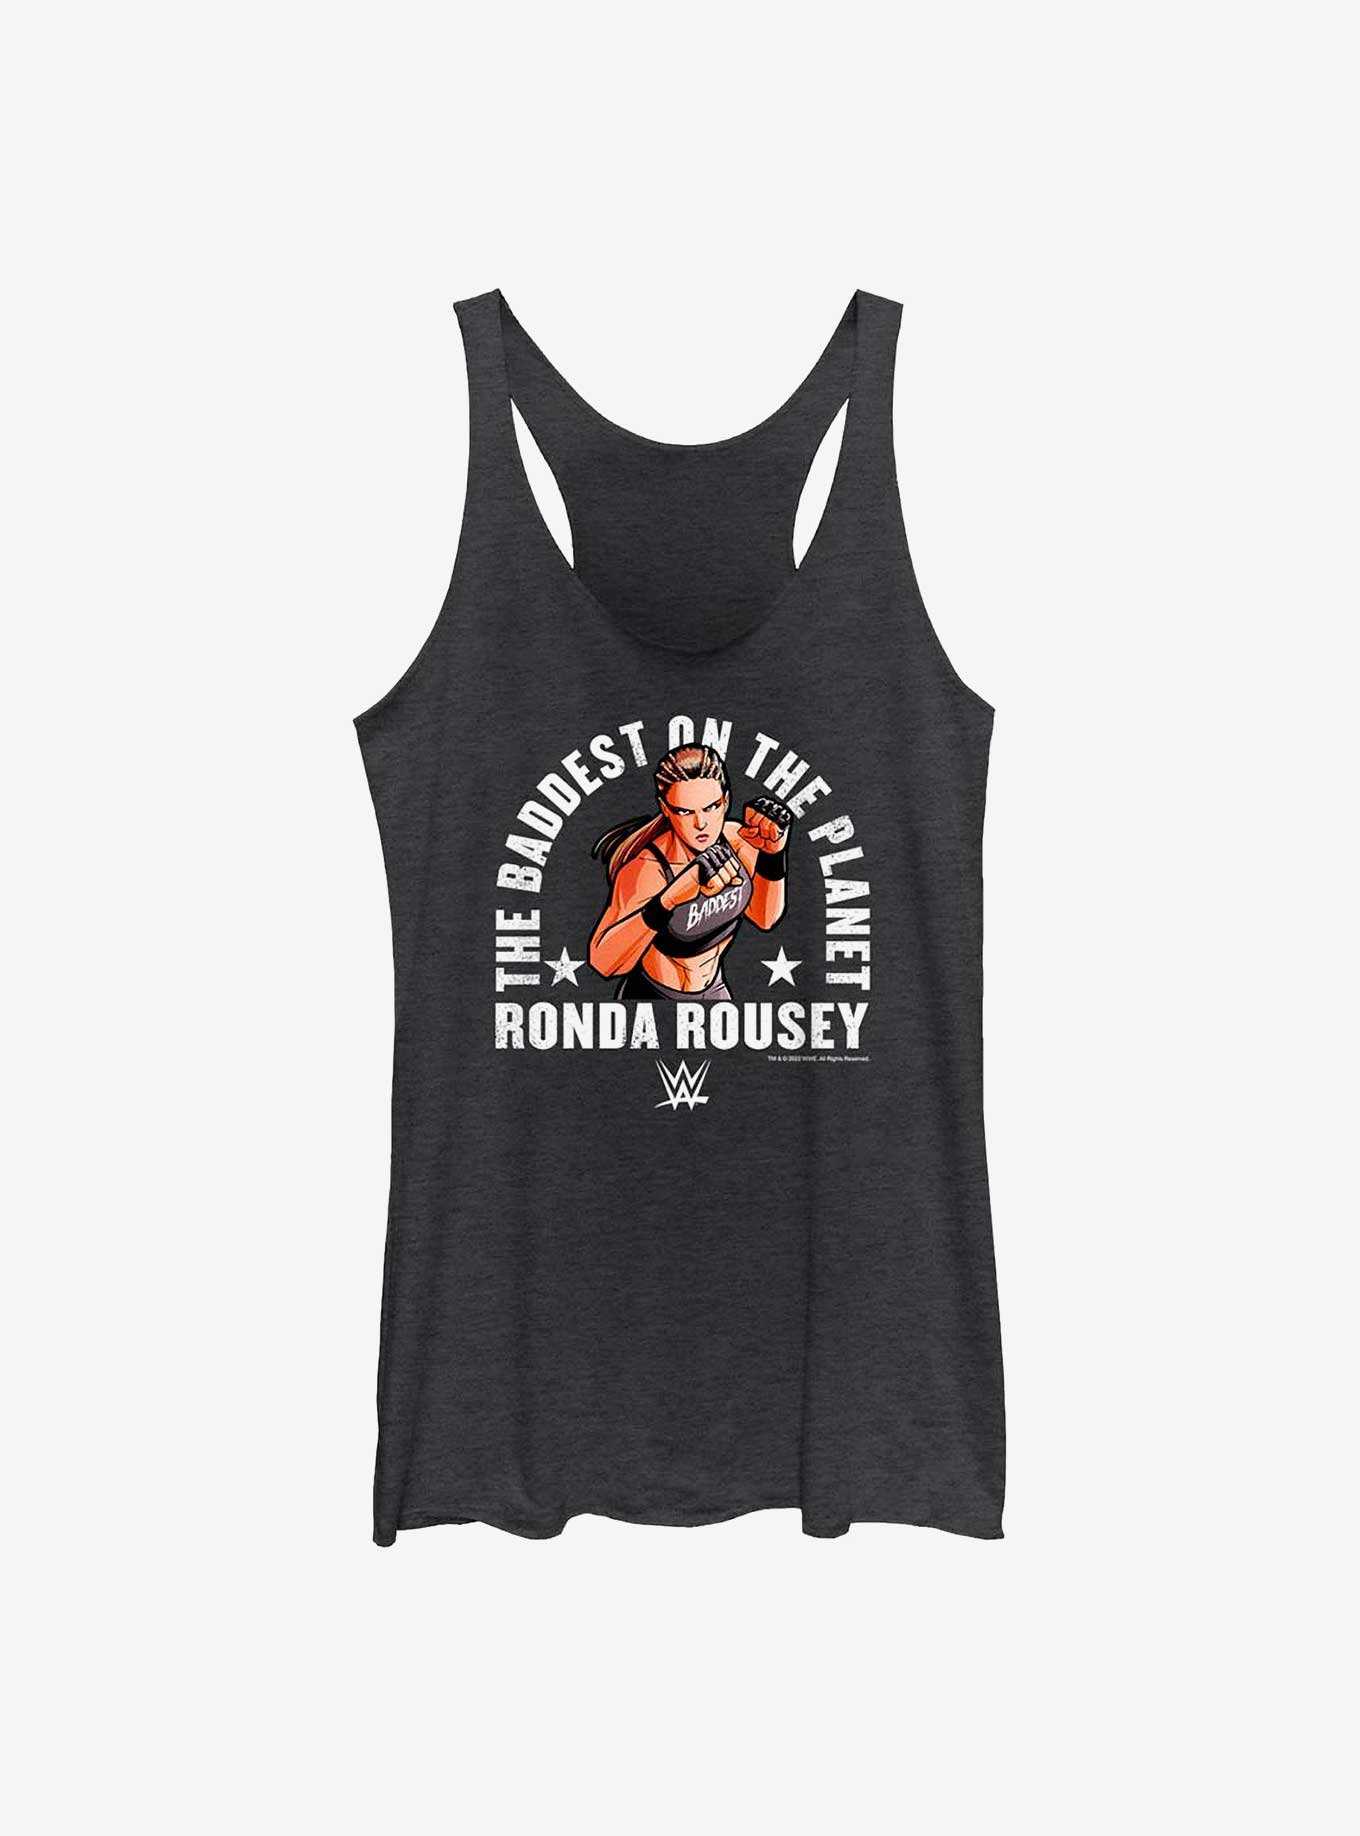 WWE The Baddest On The Planet Ronda Rousey Womens Tank Top, , hi-res